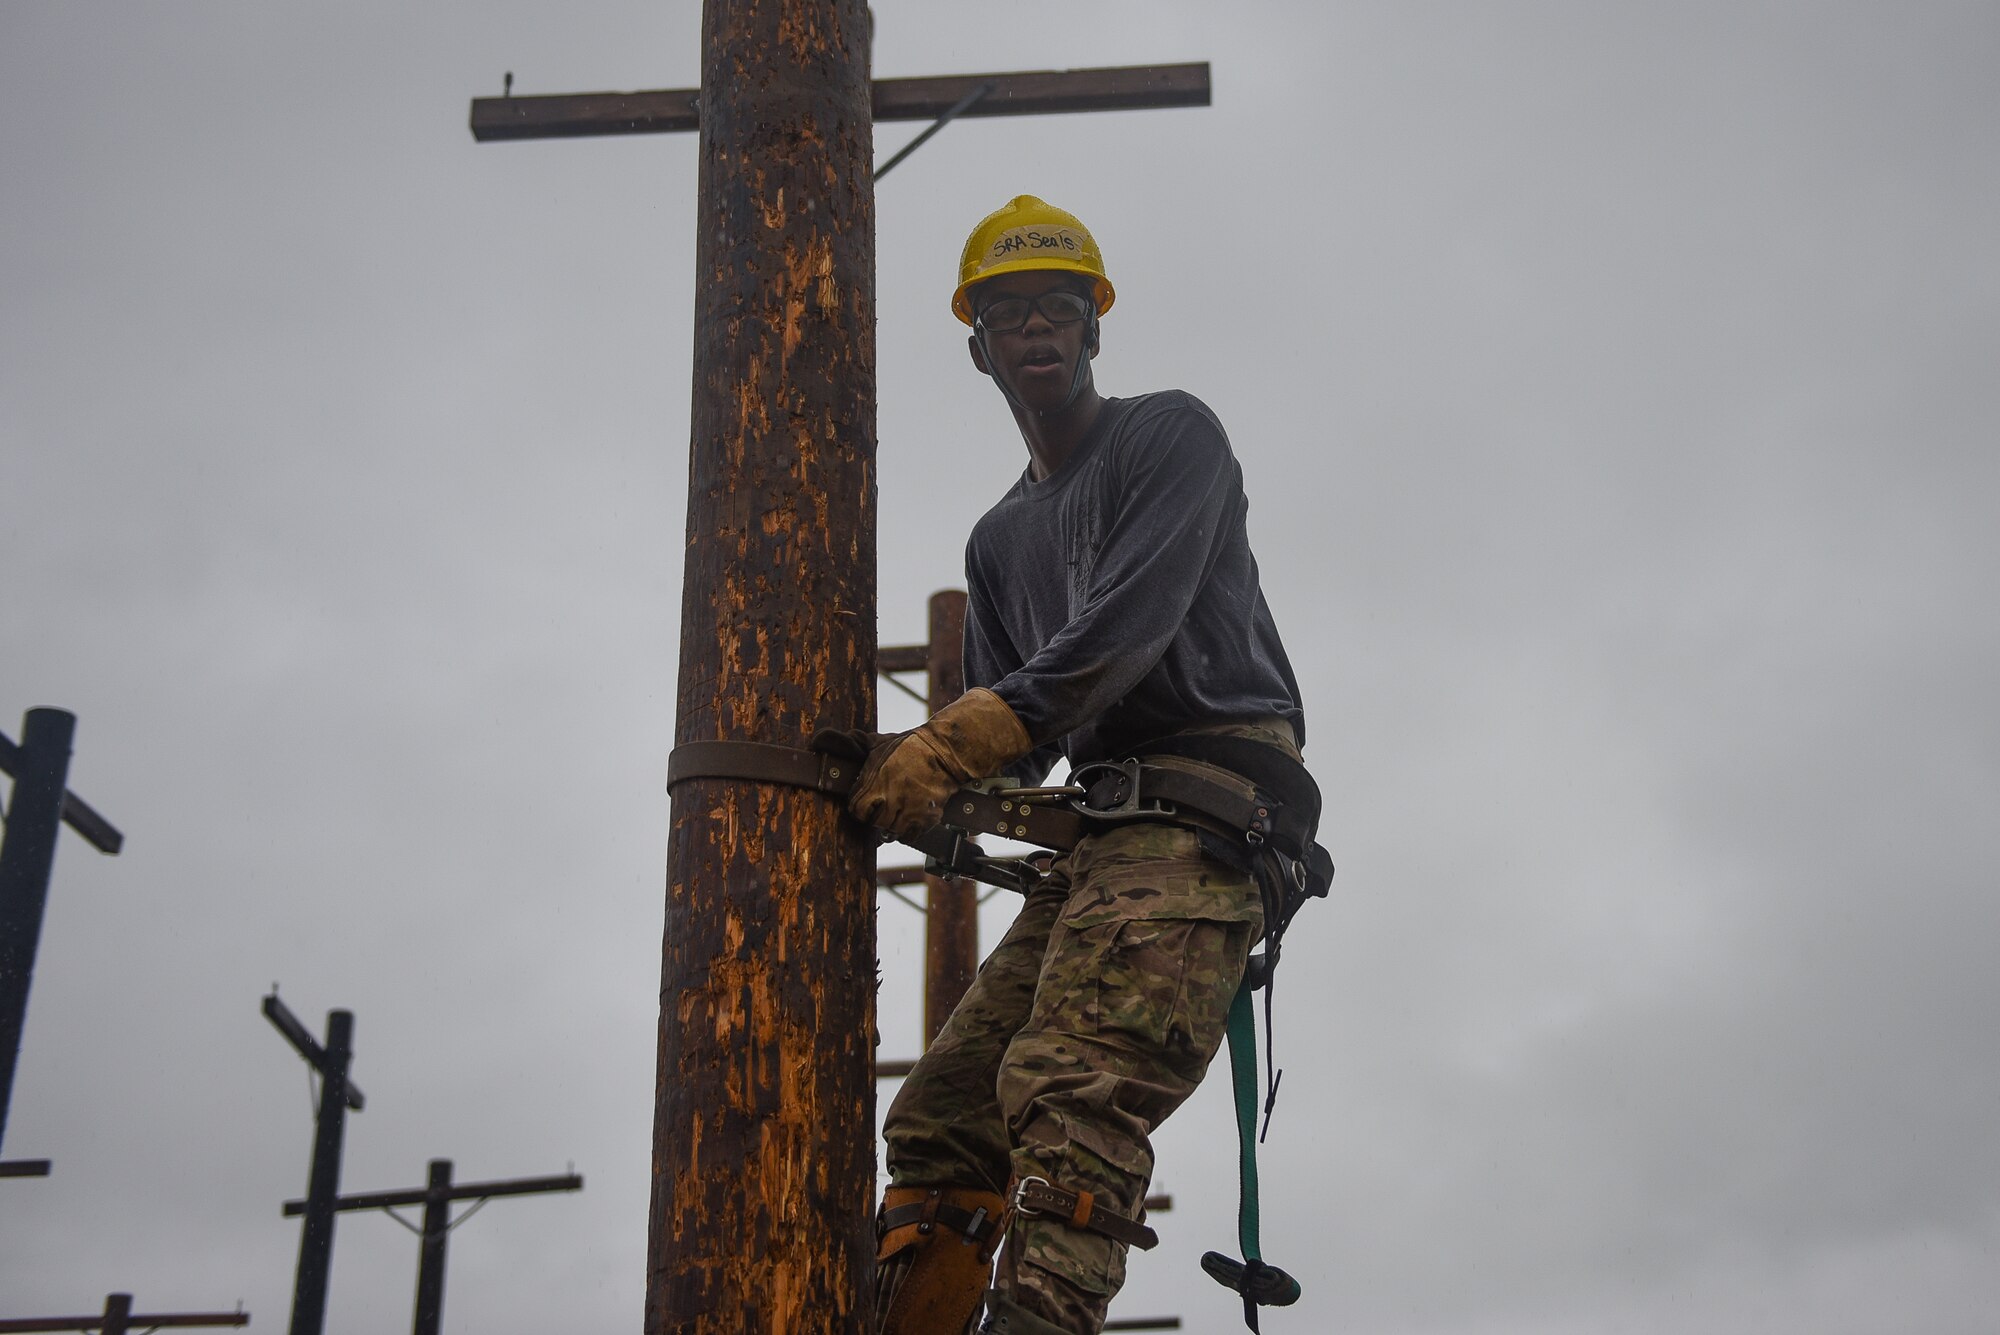 366th training squadron electrical systems apprentice course